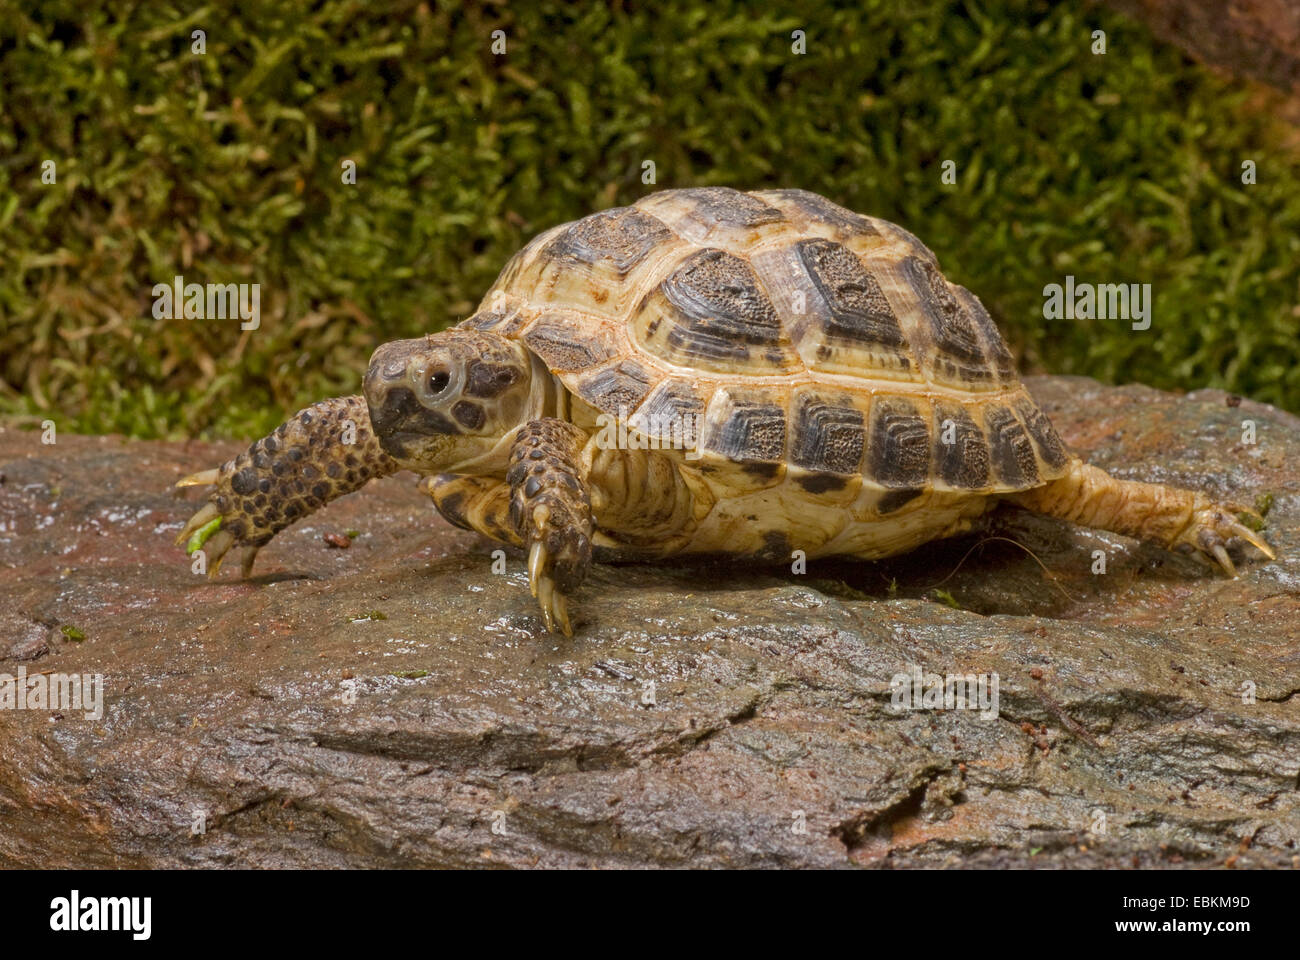 Horsfield's tortoise, four-toed tortoise, Central Asian tortoise (Agrionemys horsfieldi, Testudo horsfieldii), walking over a wet stone Stock Photo